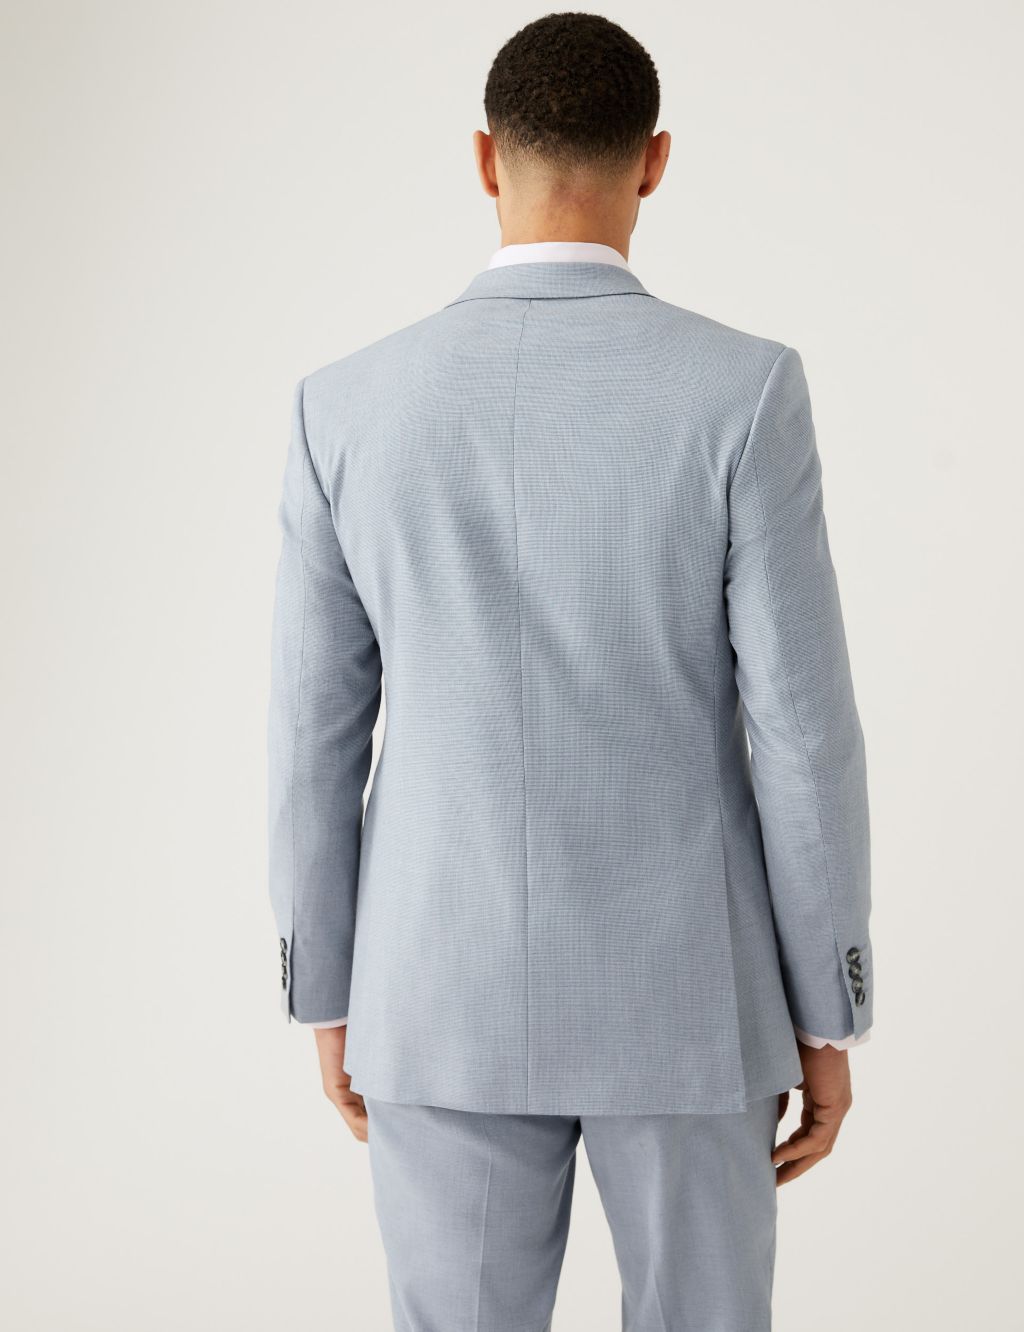 Slim Fit Puppytooth Suit image 3